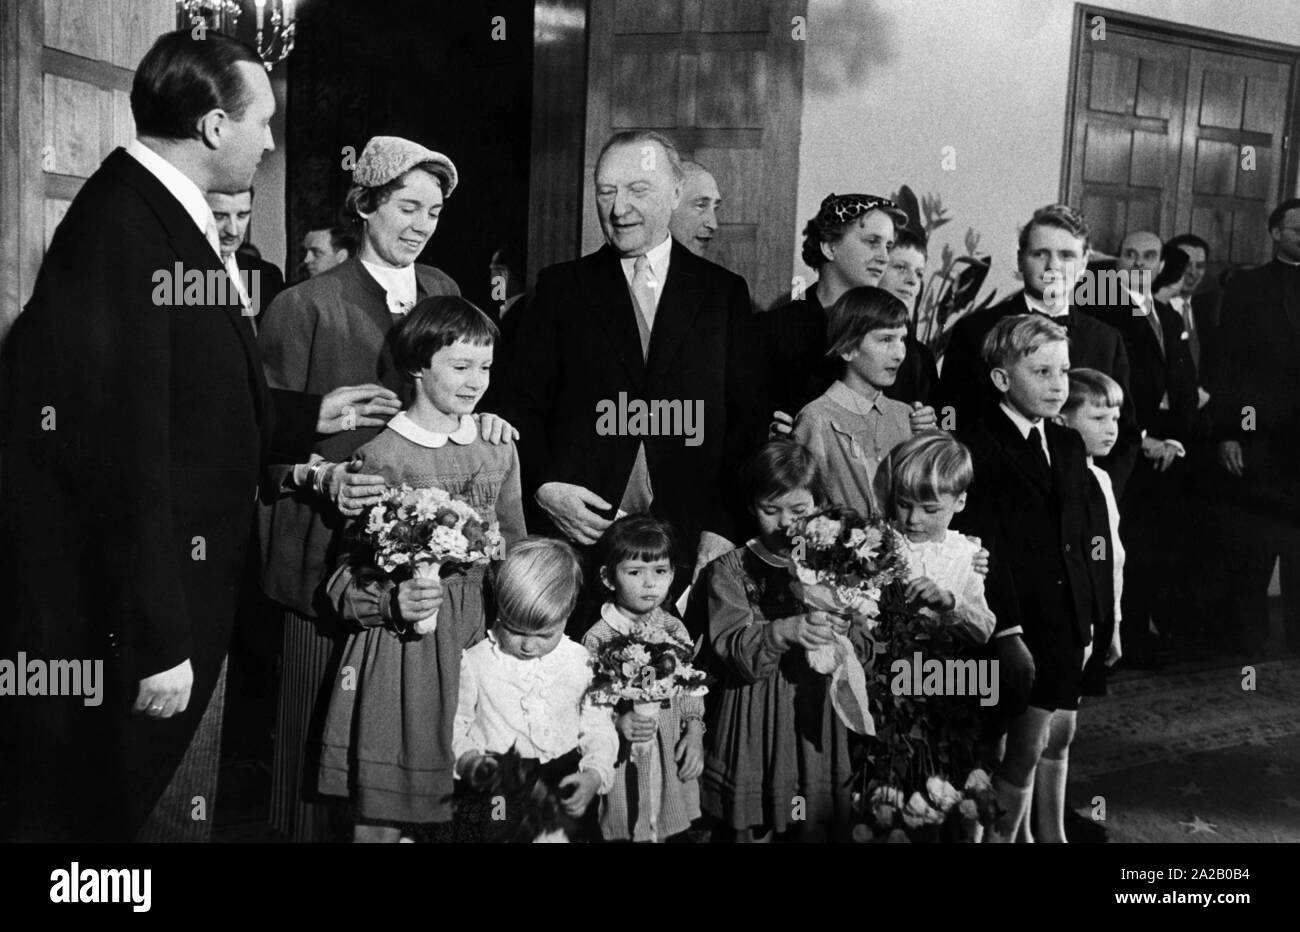 Konrad Adenauer at the Palais Schaumburg at a reception on his 80th birthday, to his left the wife of Max Adenauer with daughter Gisela, behind the chancellor his son Konrad, before him granddaughter Irene (with necklace). Stock Photo